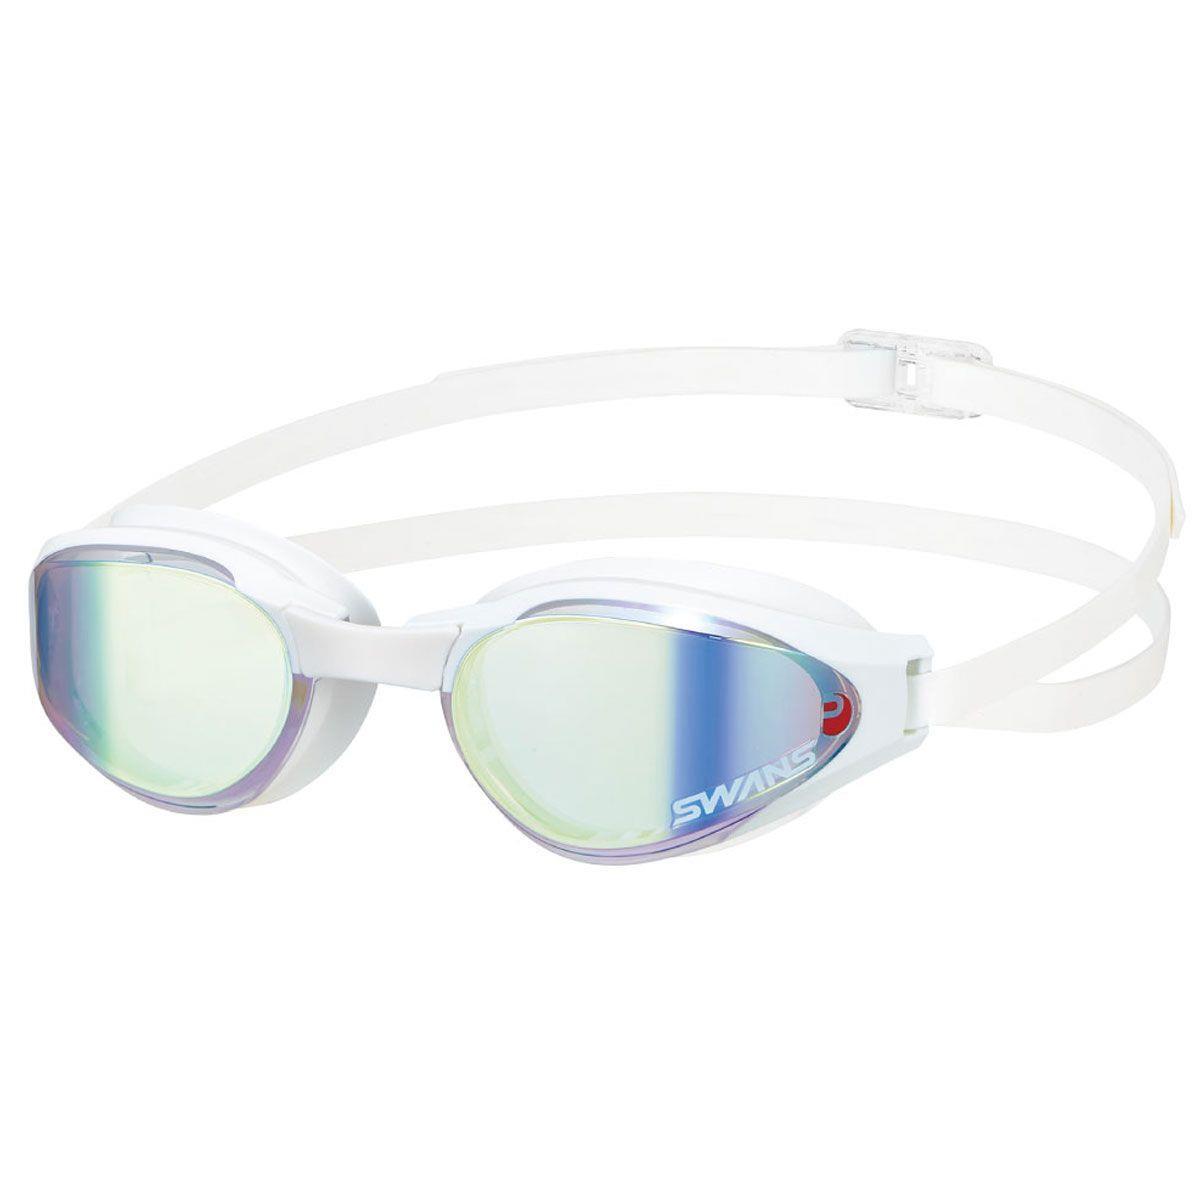 SWANS Swans SR81 Ascender Mirrored Goggles - White / Yellow